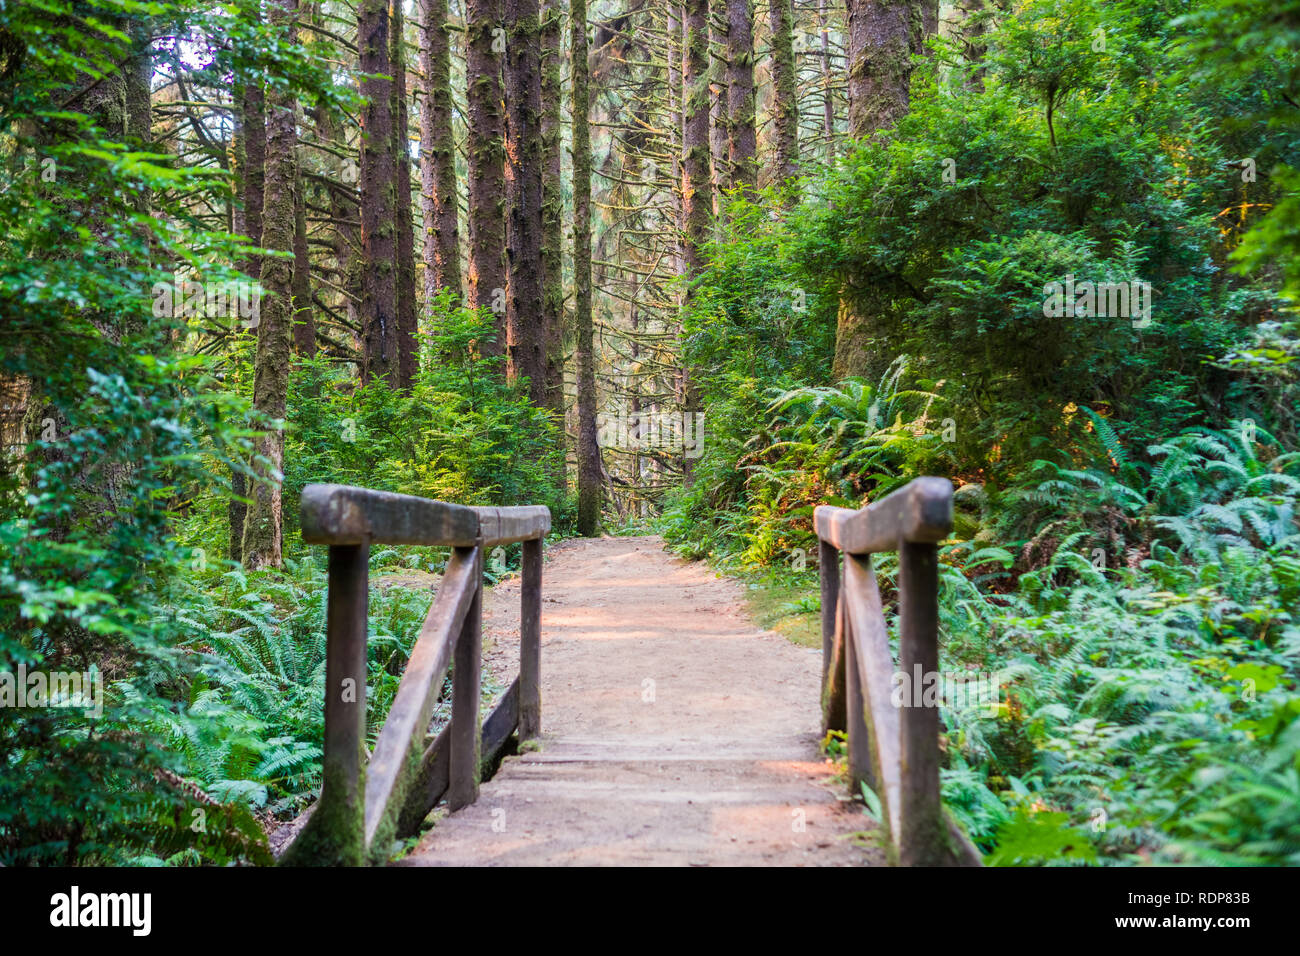 Wooden bridge and hiking path through an evergreen trees forest, Prairie Creek Redwoods State Park, California Stock Photo